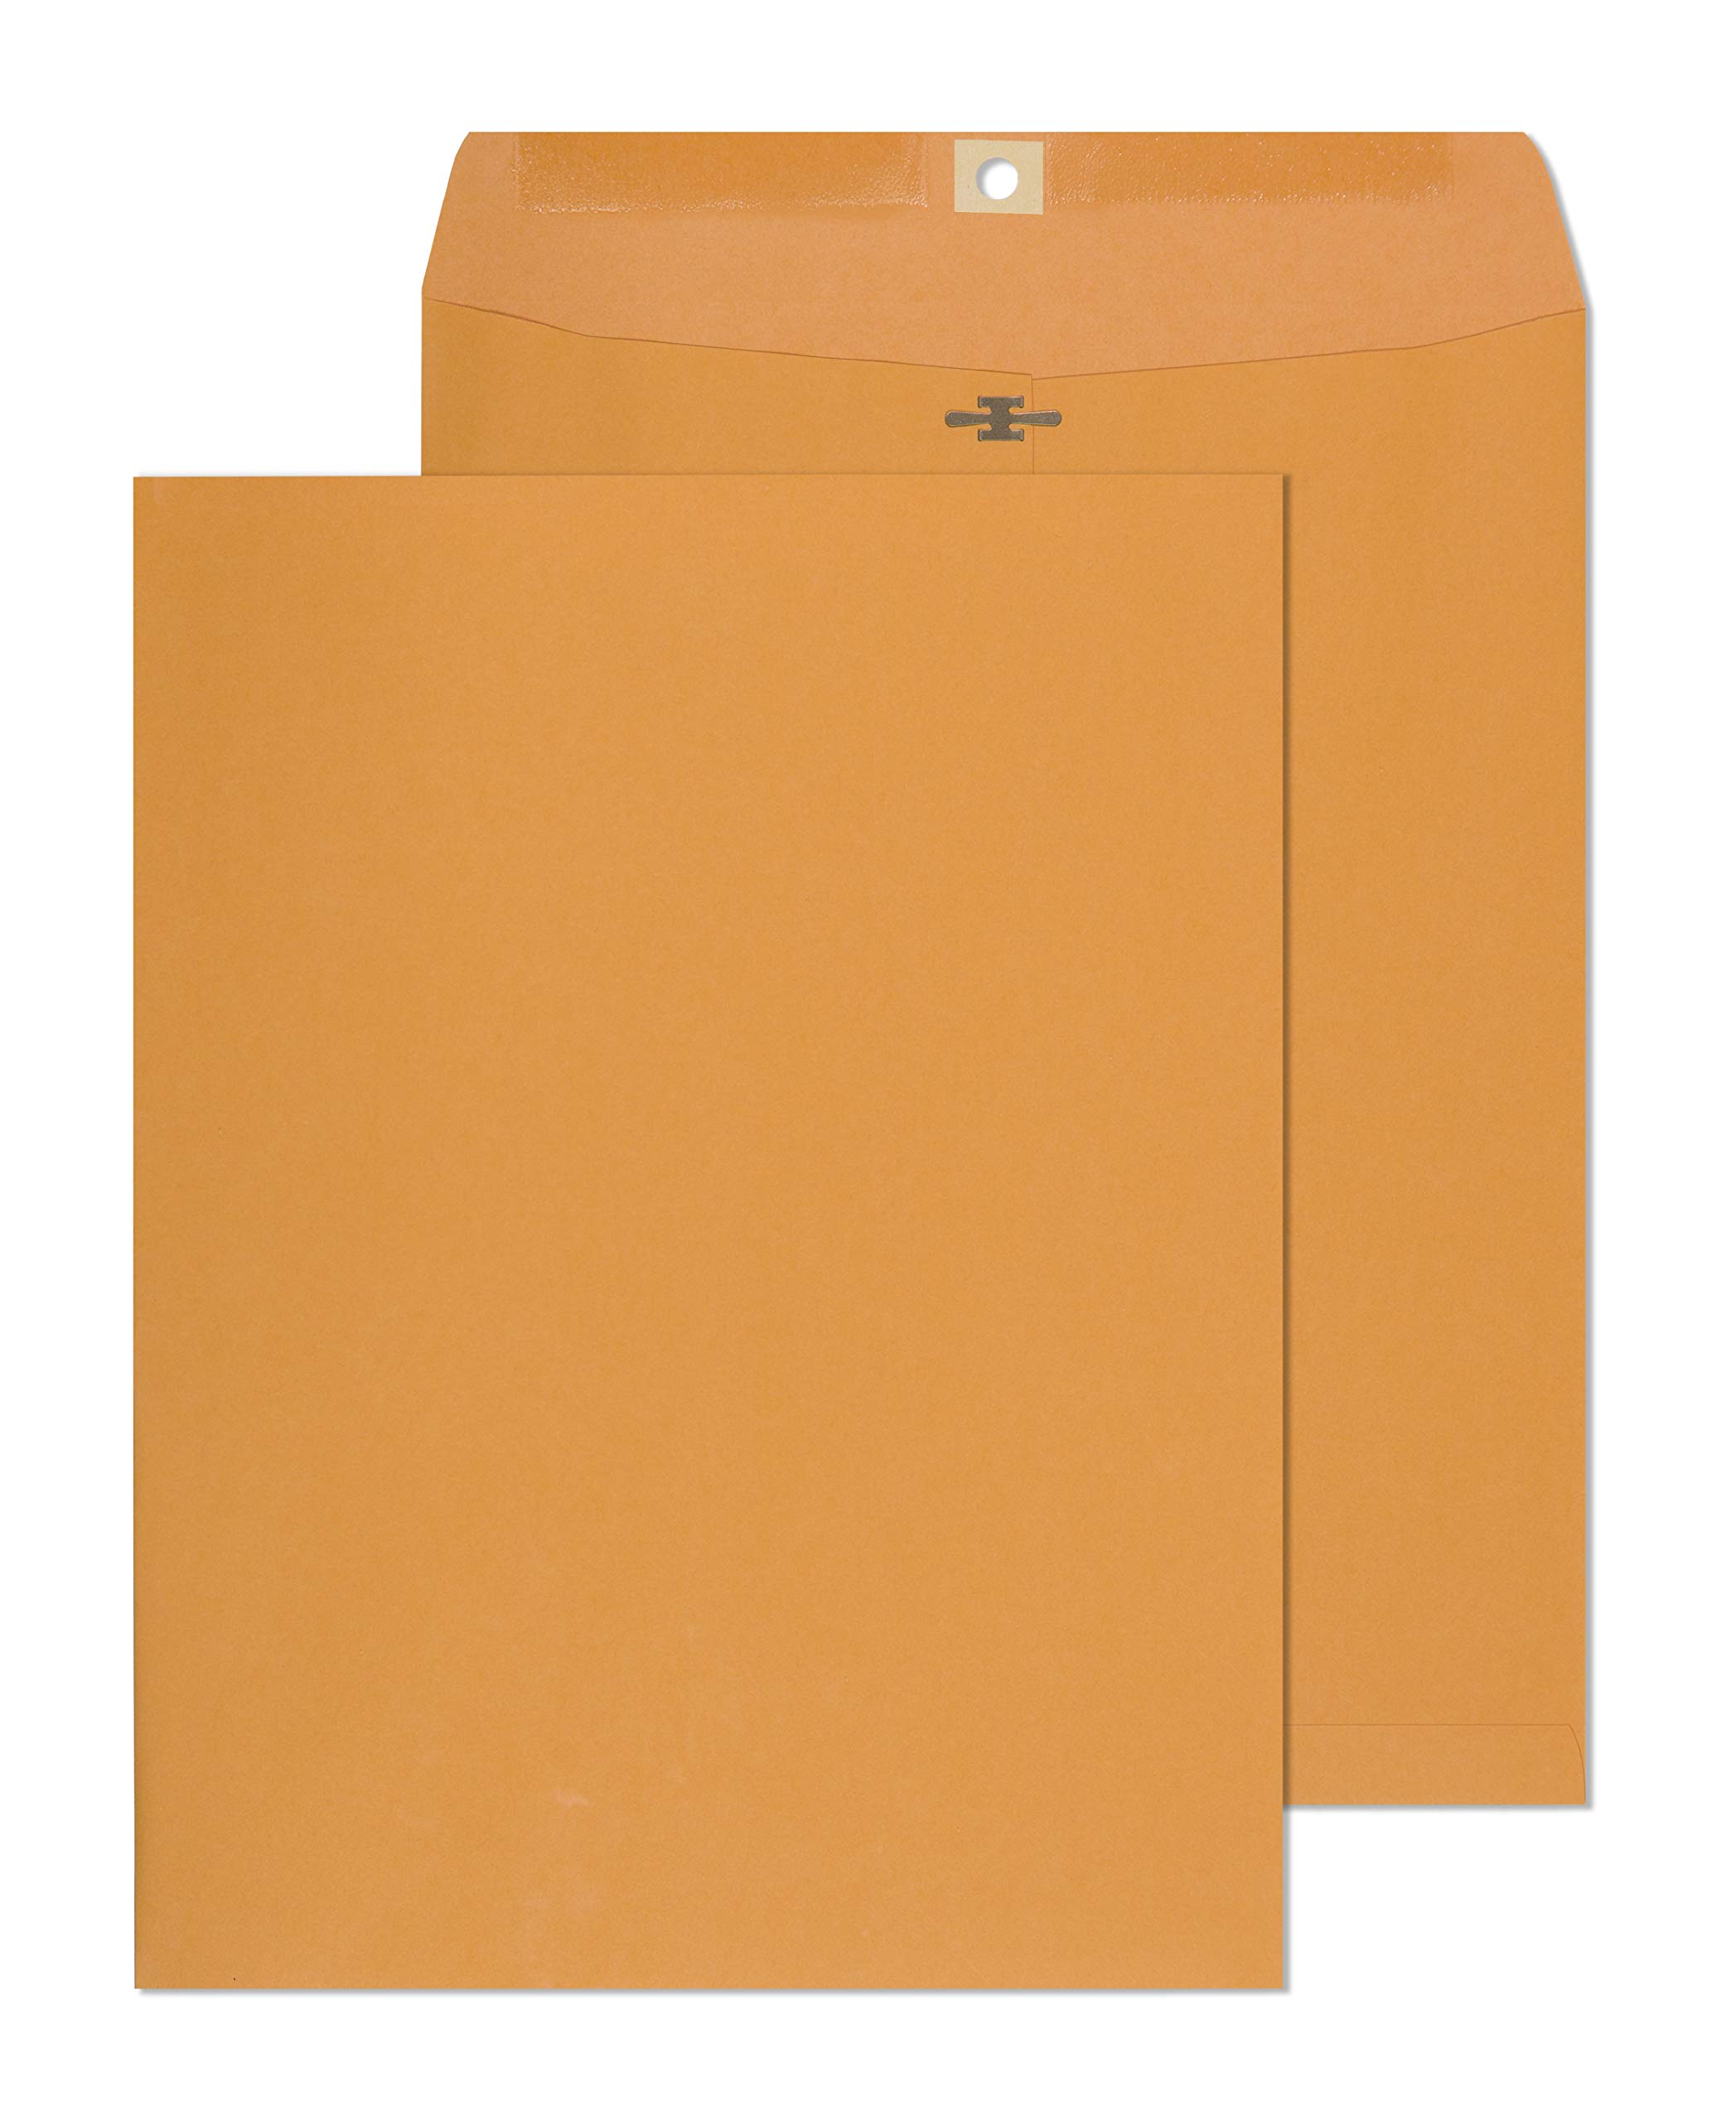 Book Cover Clasp Envelopes - 10x13 Inch Brown Kraft Catalog Envelopes with Clasp Closure & Gummed Seal - 28lb Heavyweight Paper Envelopes for Home, Office, Business, Legal or School 30 Pack 10x13, Brown Kraft